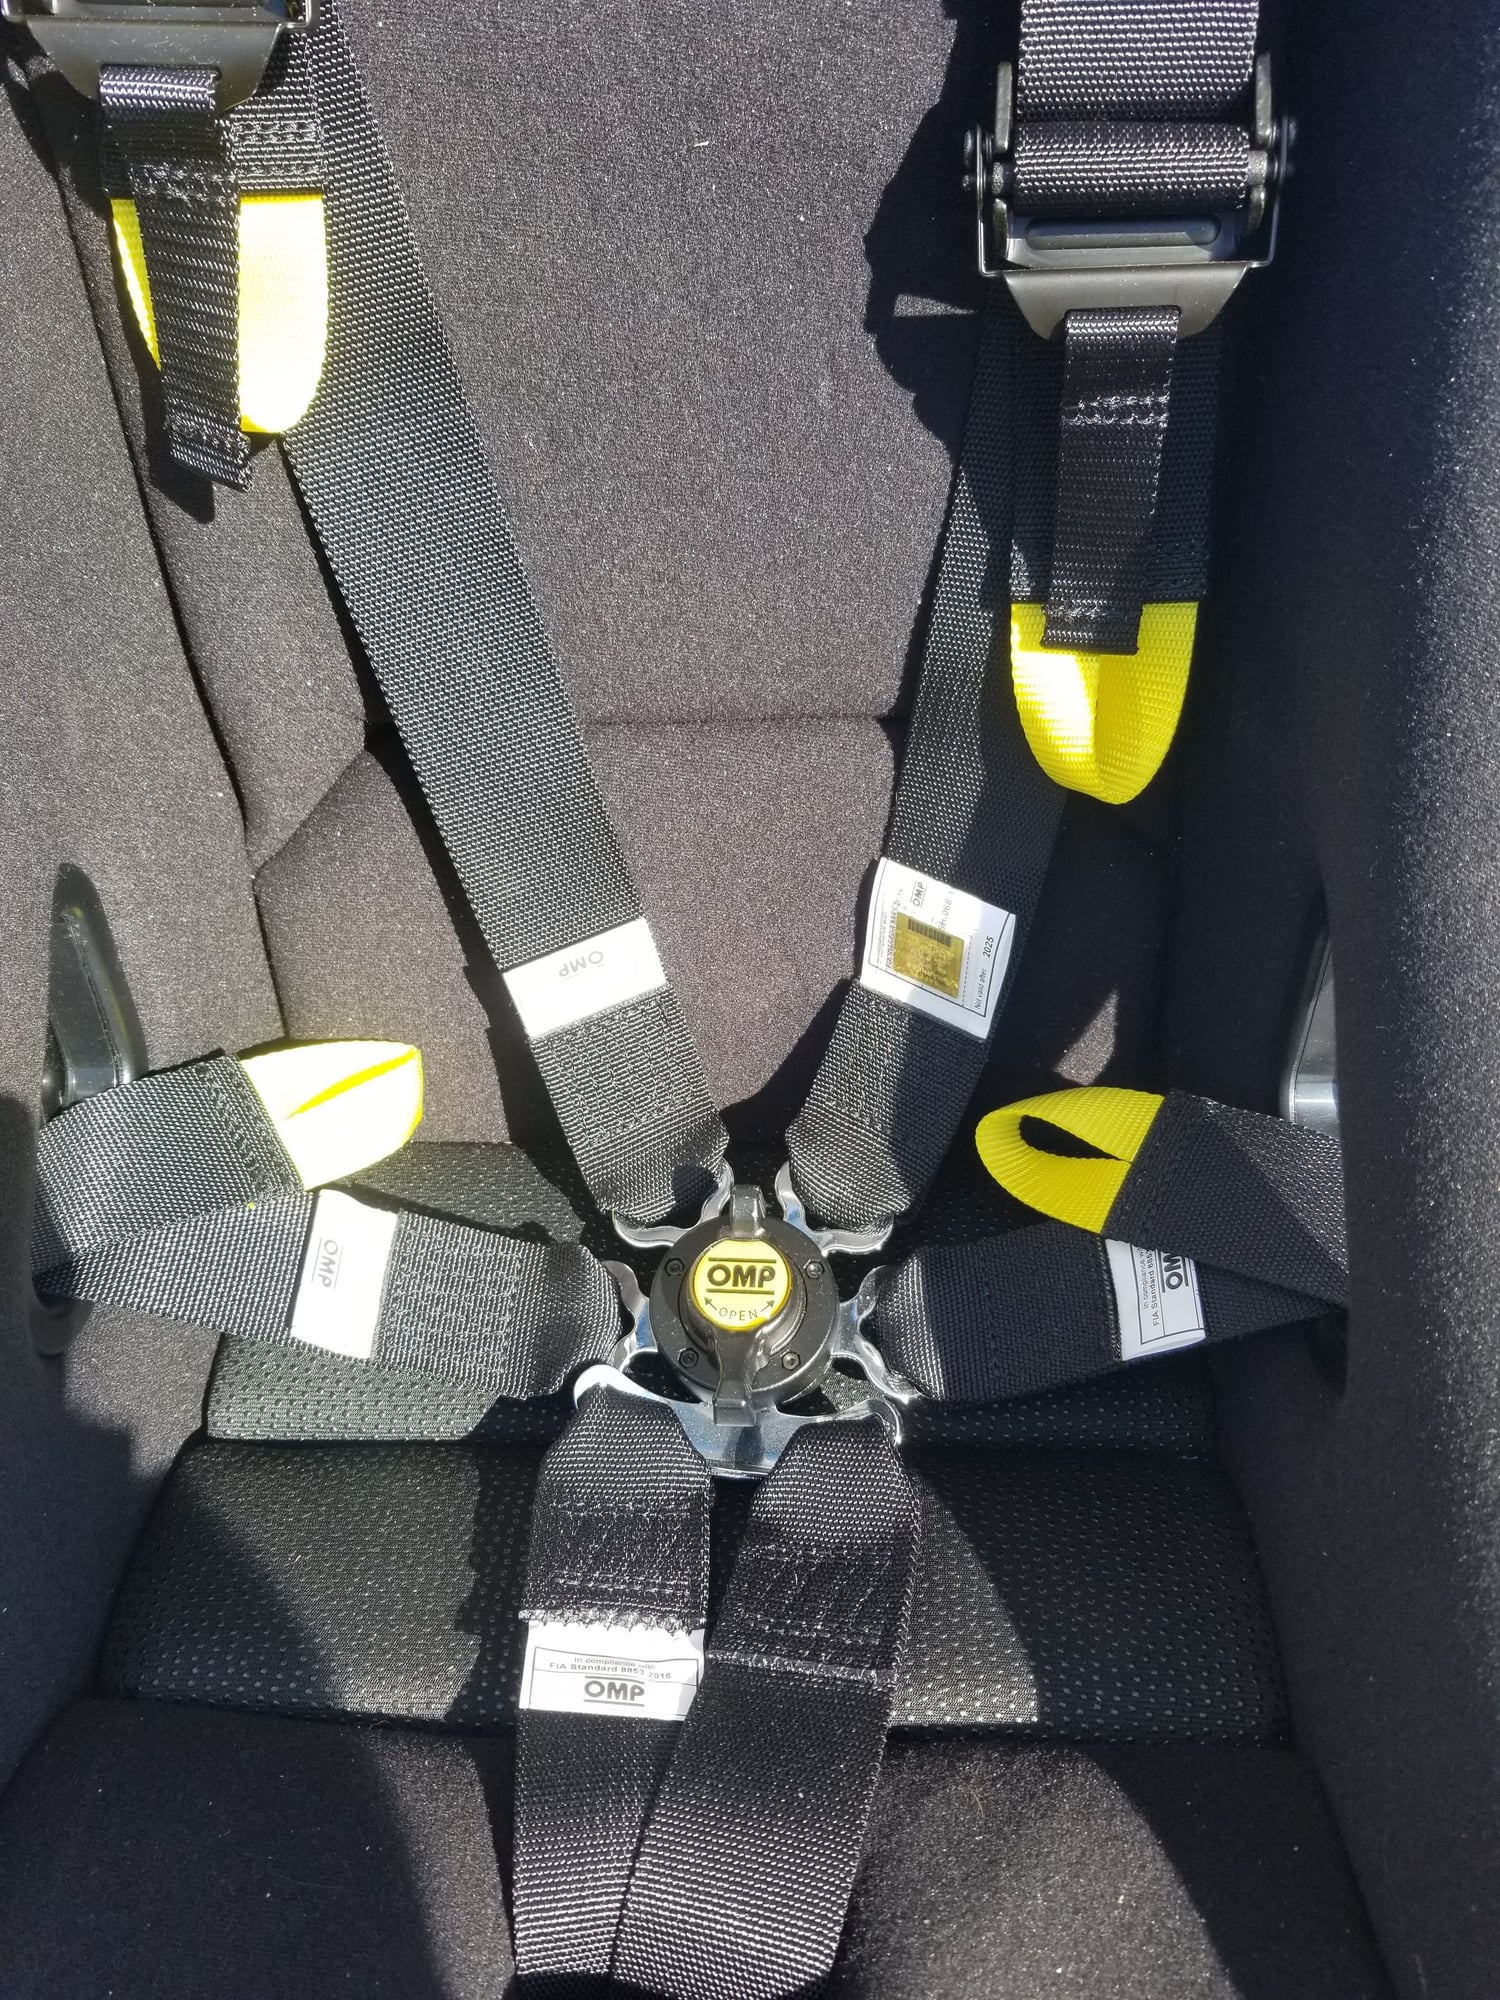 Interior/Upholstery - *NEW* Full 996, 997, 987 OMP Racing Seat & Harness Set Up on sliders w/Brey-Krause - New - 2004 to 2011 Porsche 911 - 2006 to 2012 Porsche Cayman - Chesapeake, VA 23321, United States